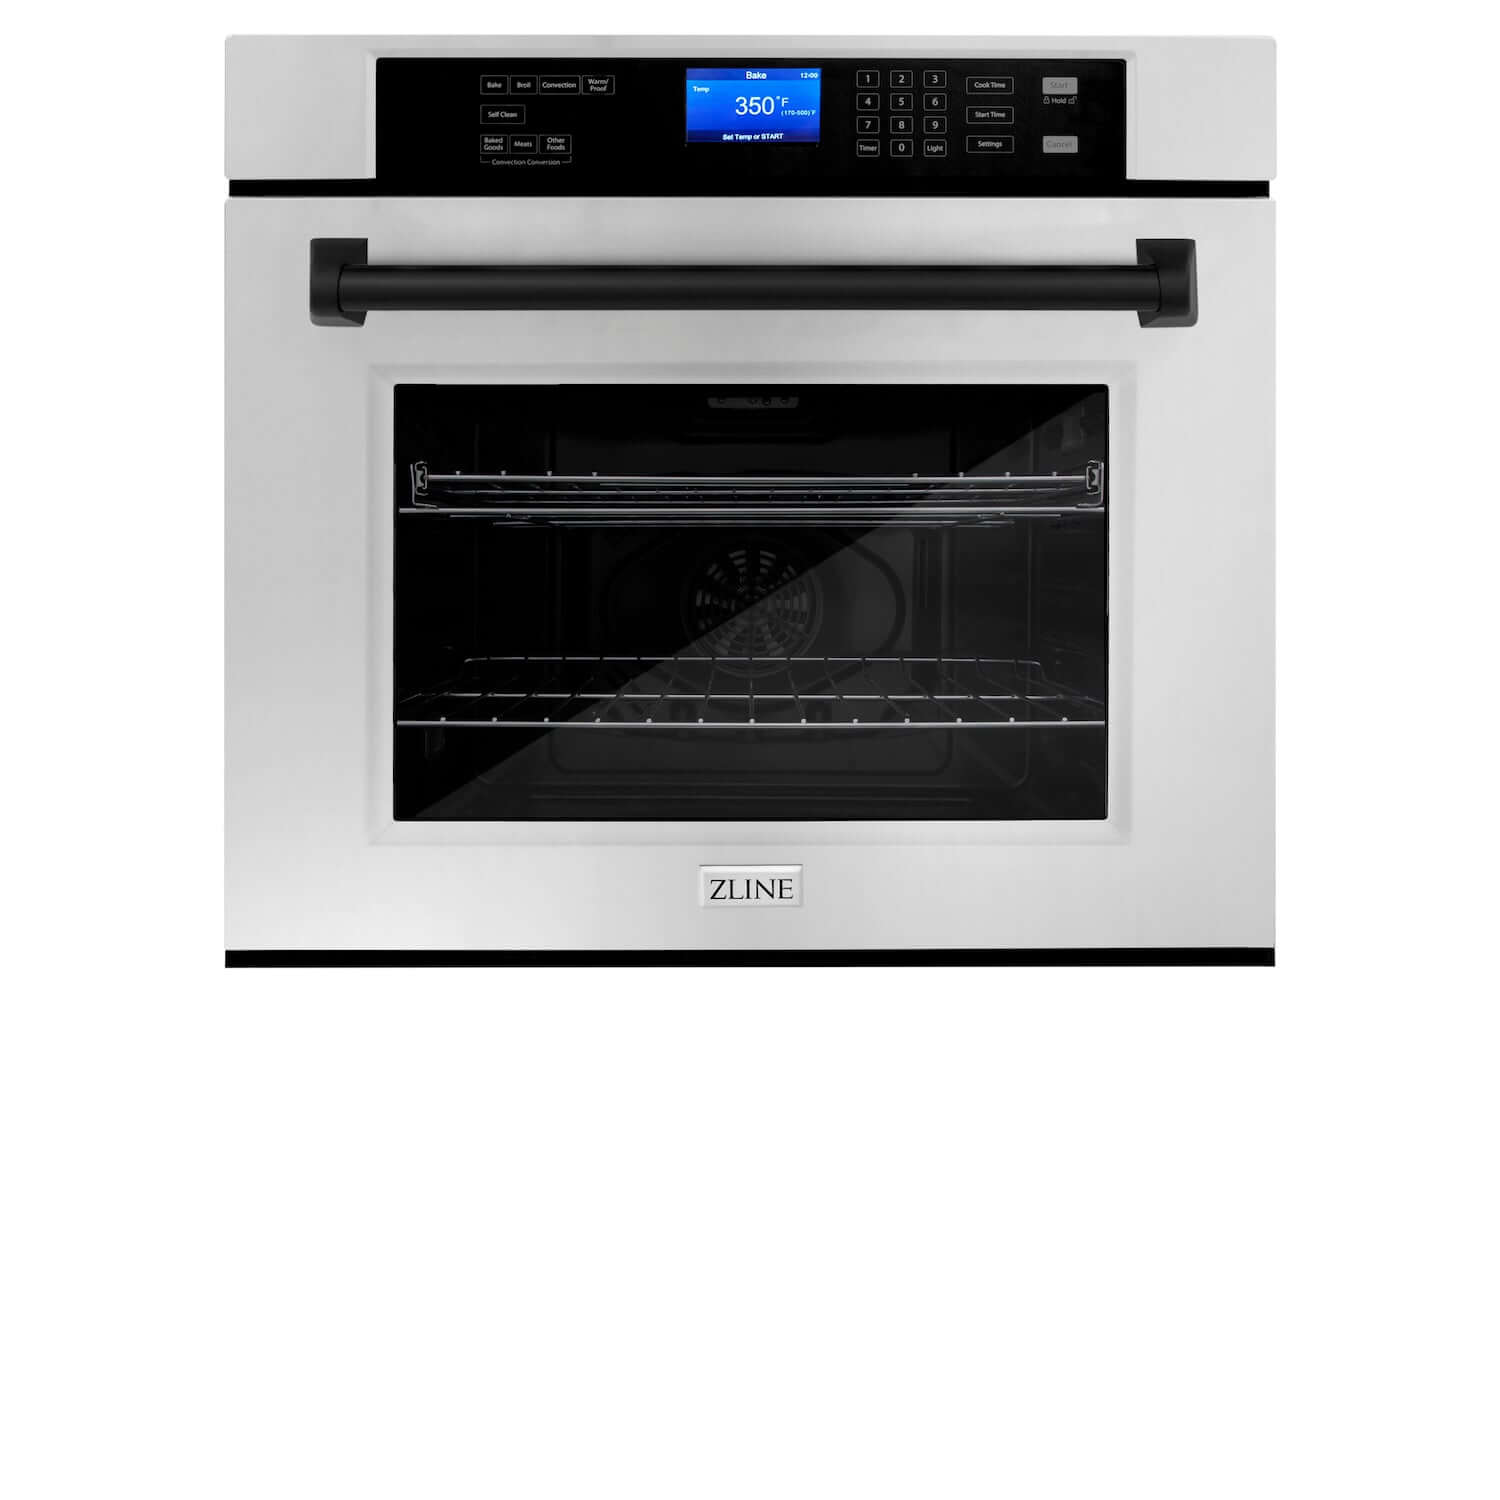 ZLINE Autograph Edition 30 in. Electric Single Wall Oven with Self Clean and True Convection in Stainless Steel and Matte Black Accents (AWSZ-30-MB) front.